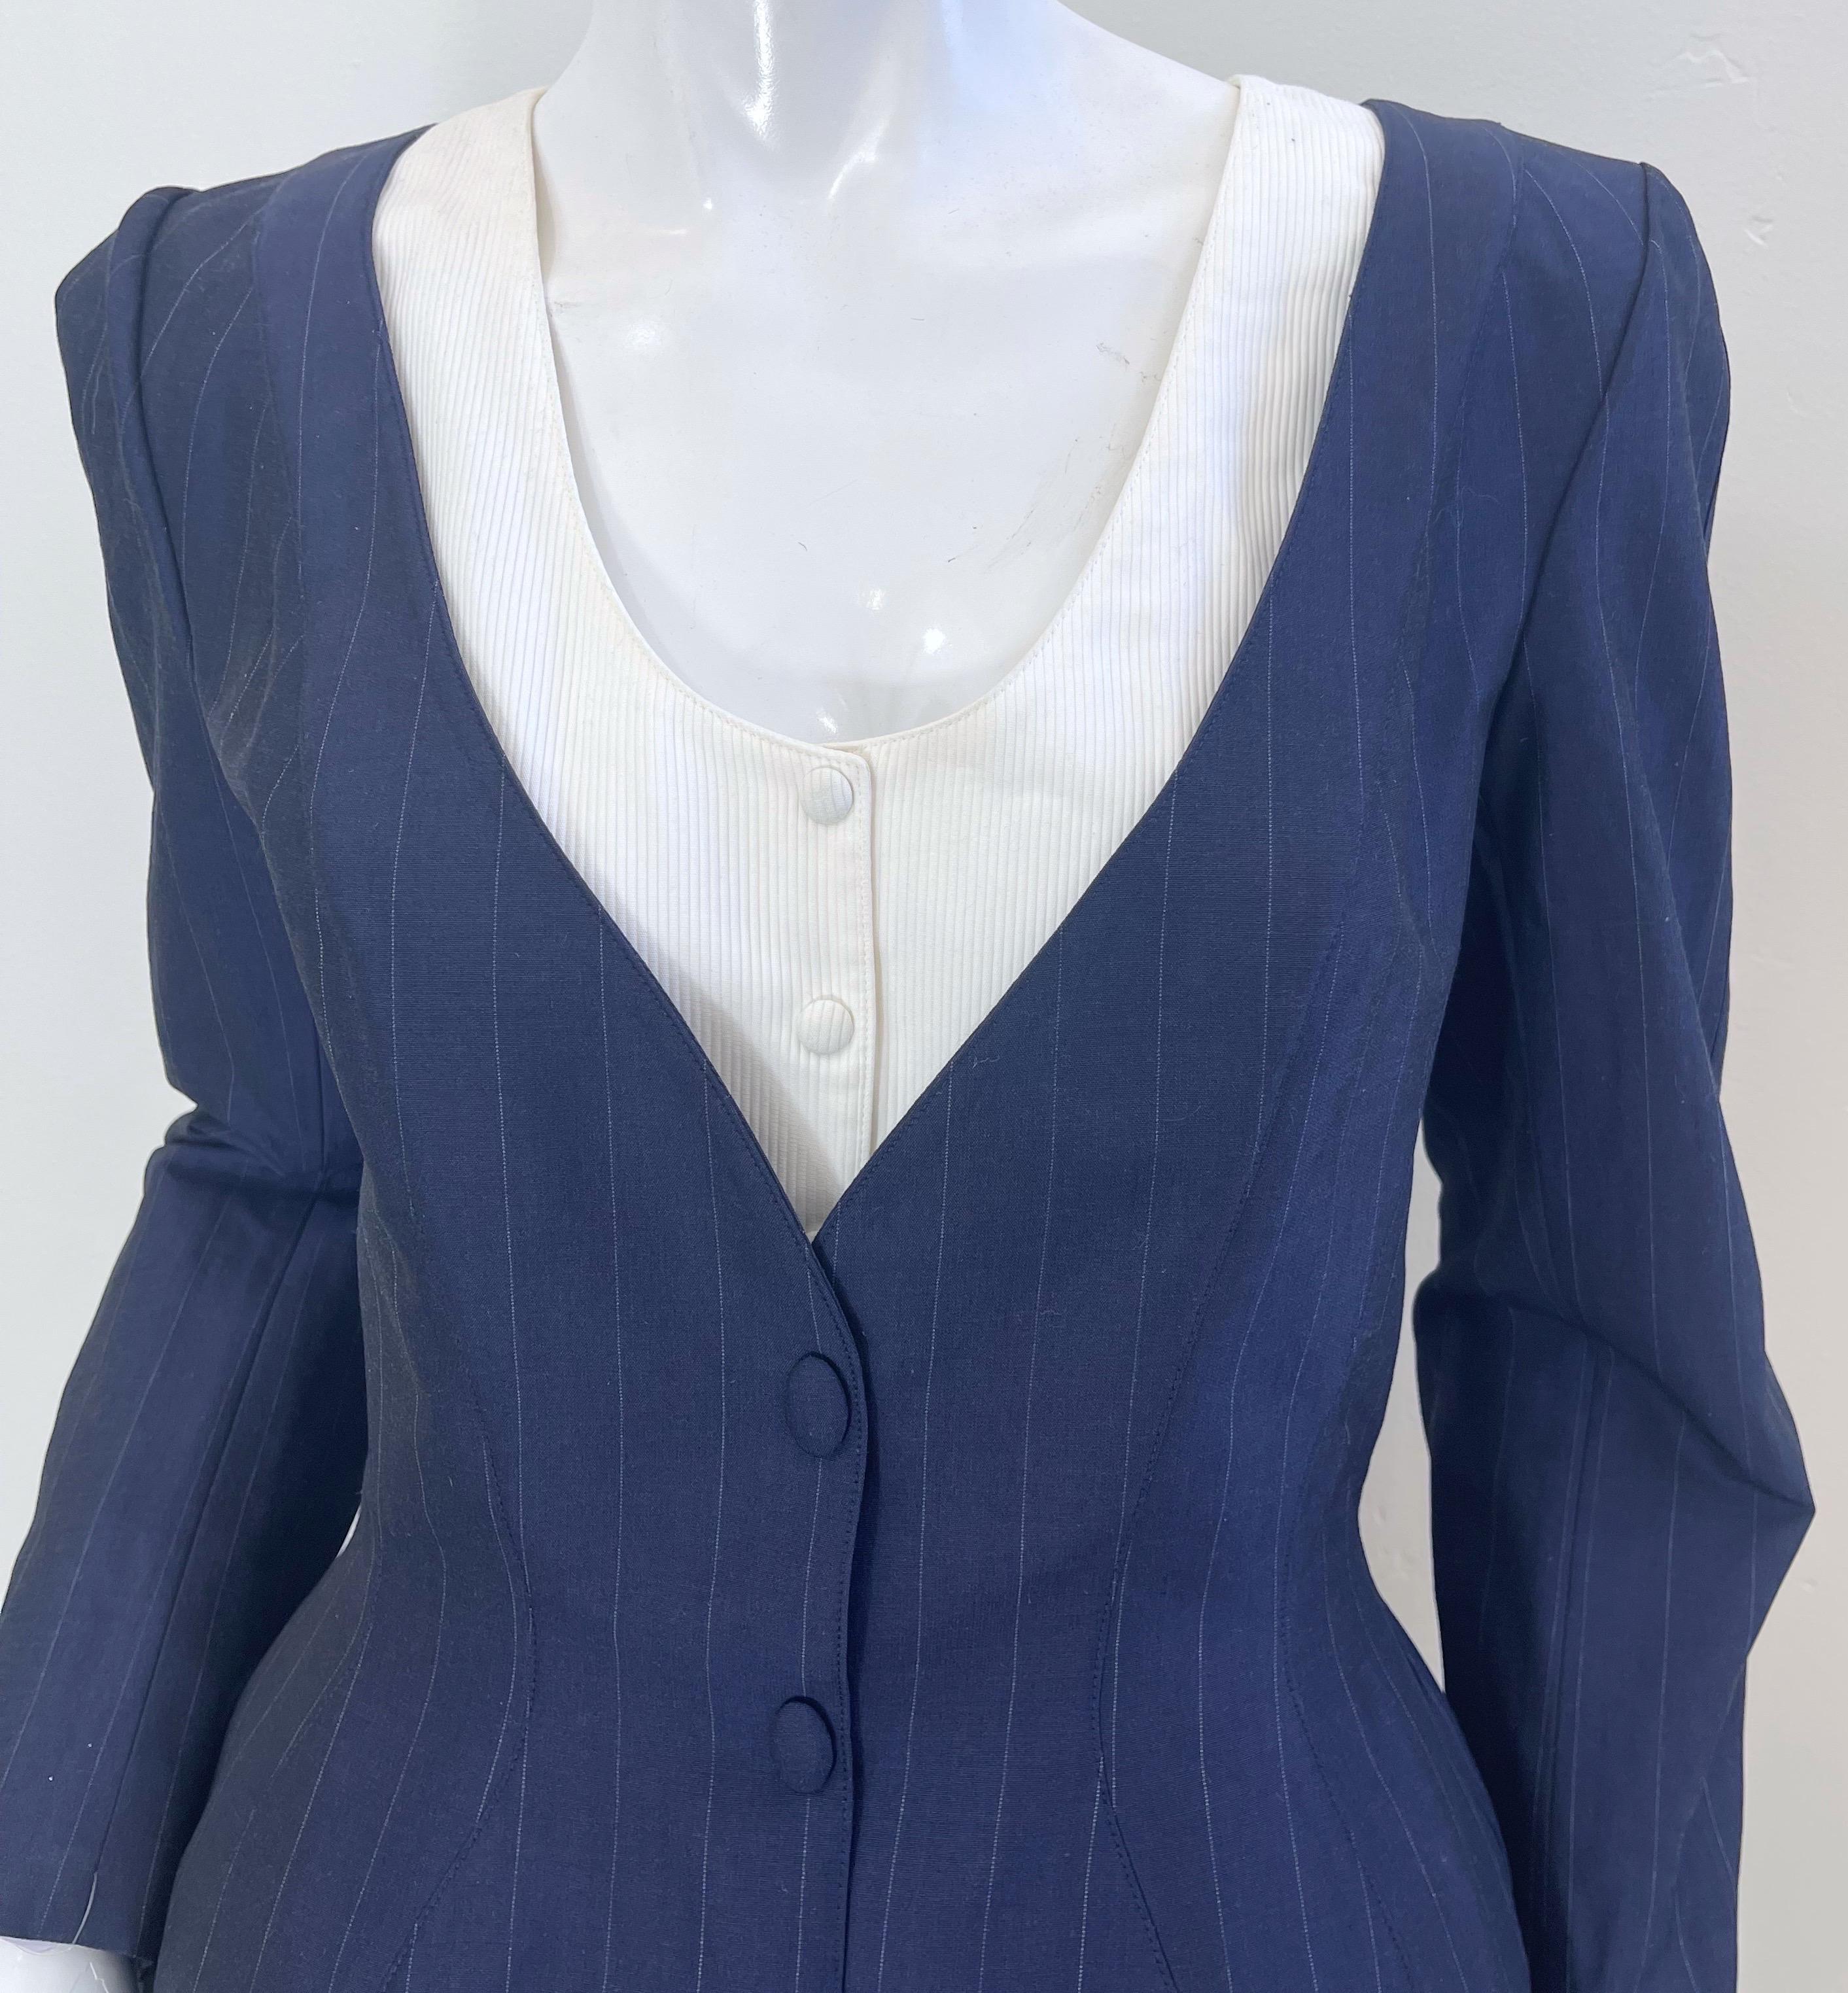 Women's NWT 1990s Thierry Mugler Navy Blue Pinstripe Size 4 Vintage 90s Skirt Suit For Sale